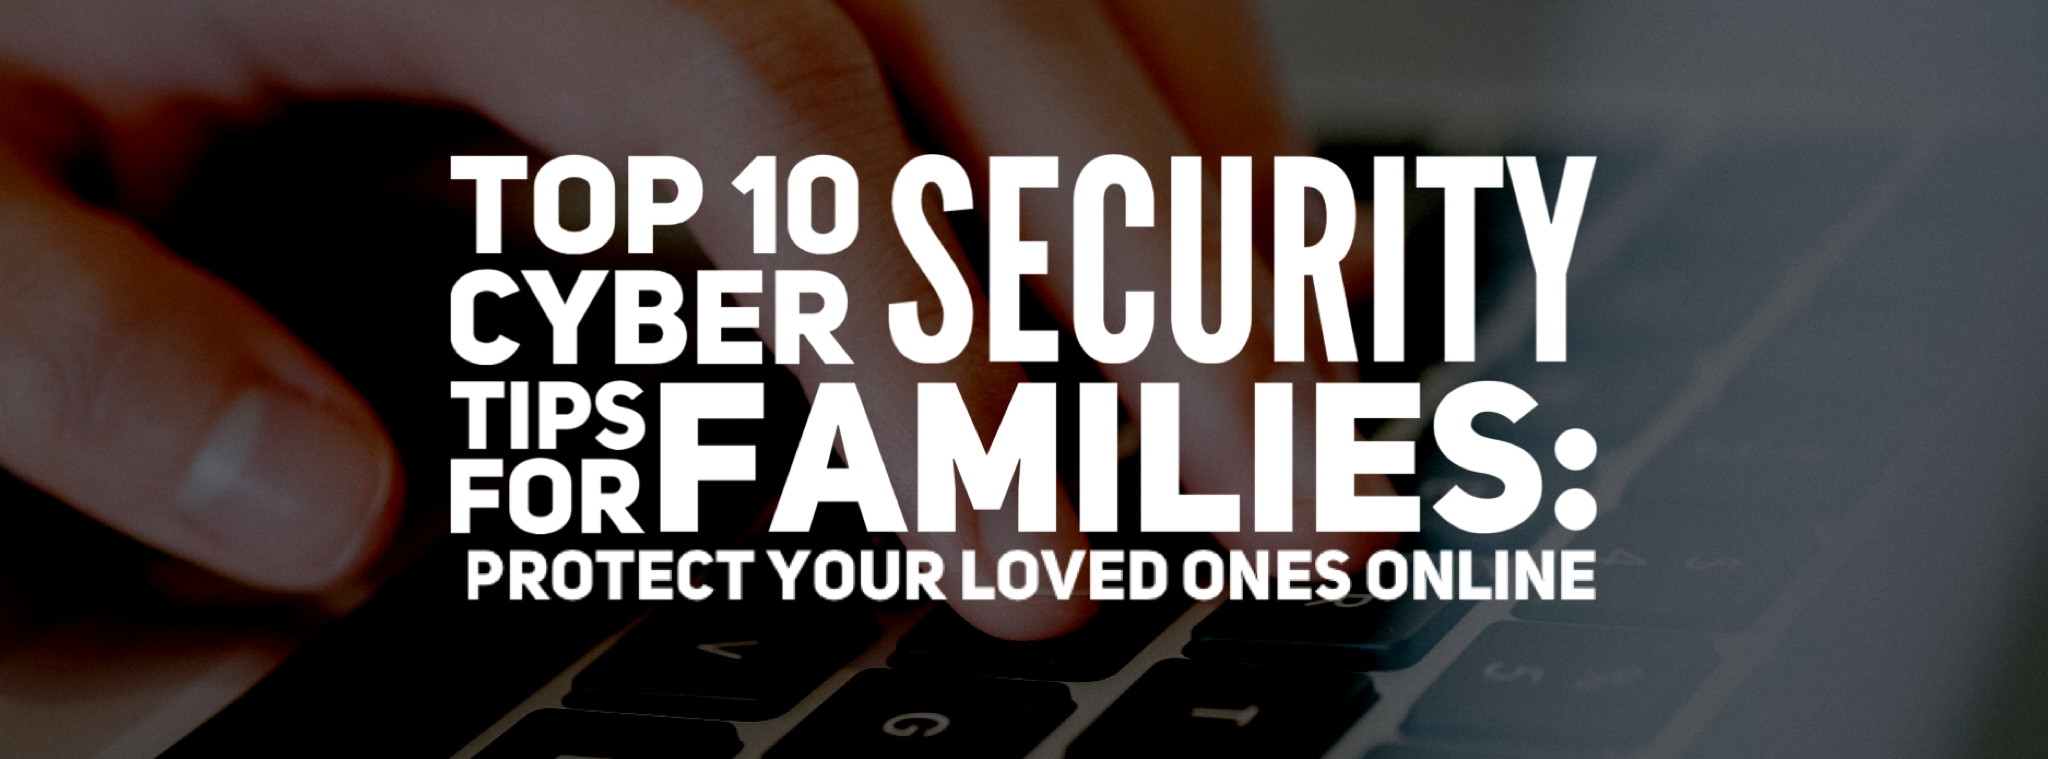 Top 10 Cyber Security Tips for Families: Protect Your Loved Ones Online